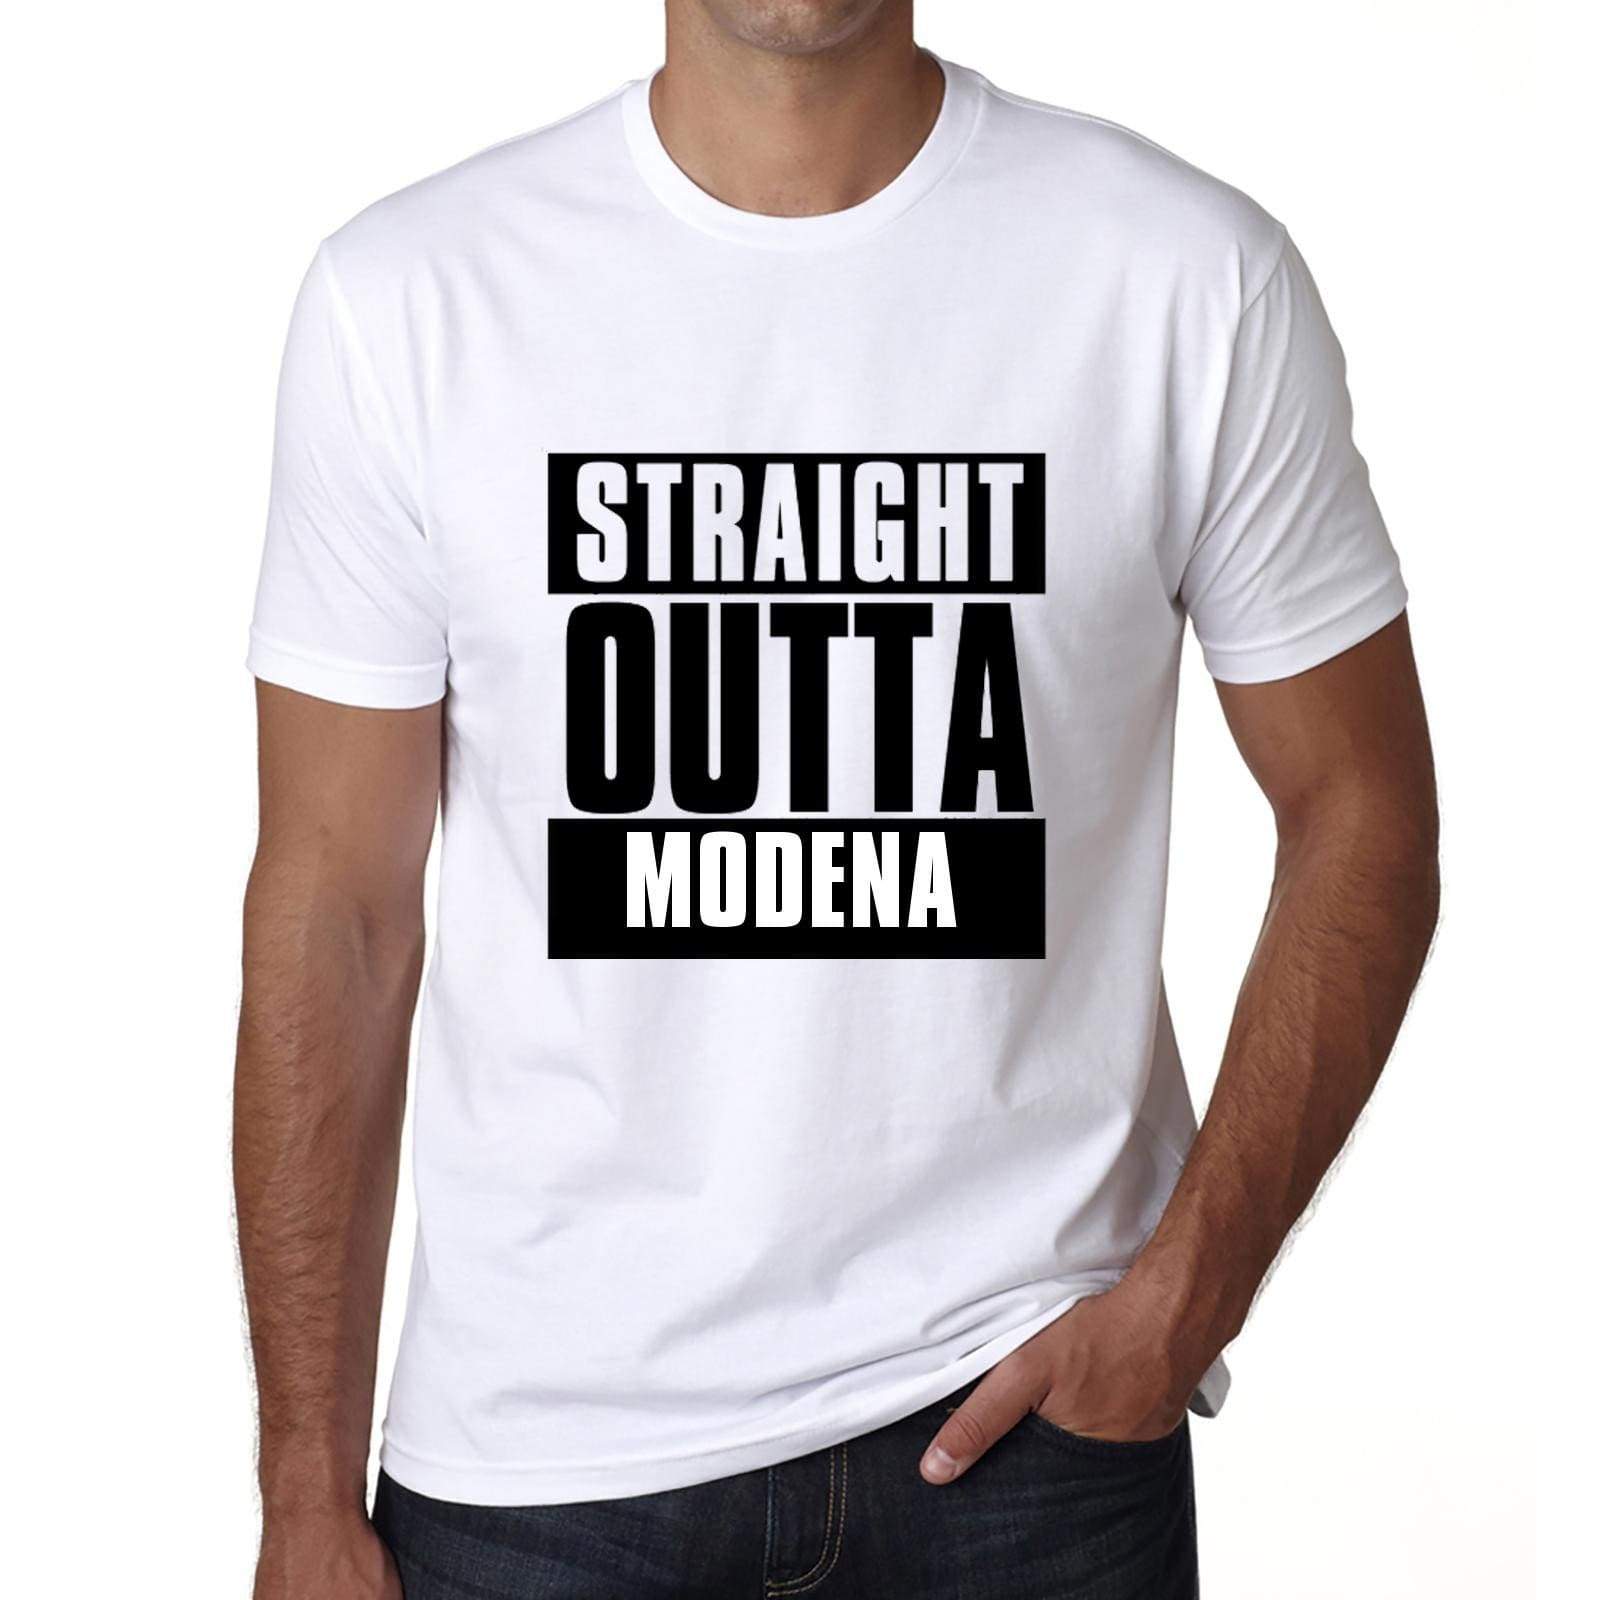 Straight Outta Modena Mens Short Sleeve Round Neck T-Shirt 00027 - White / S - Casual